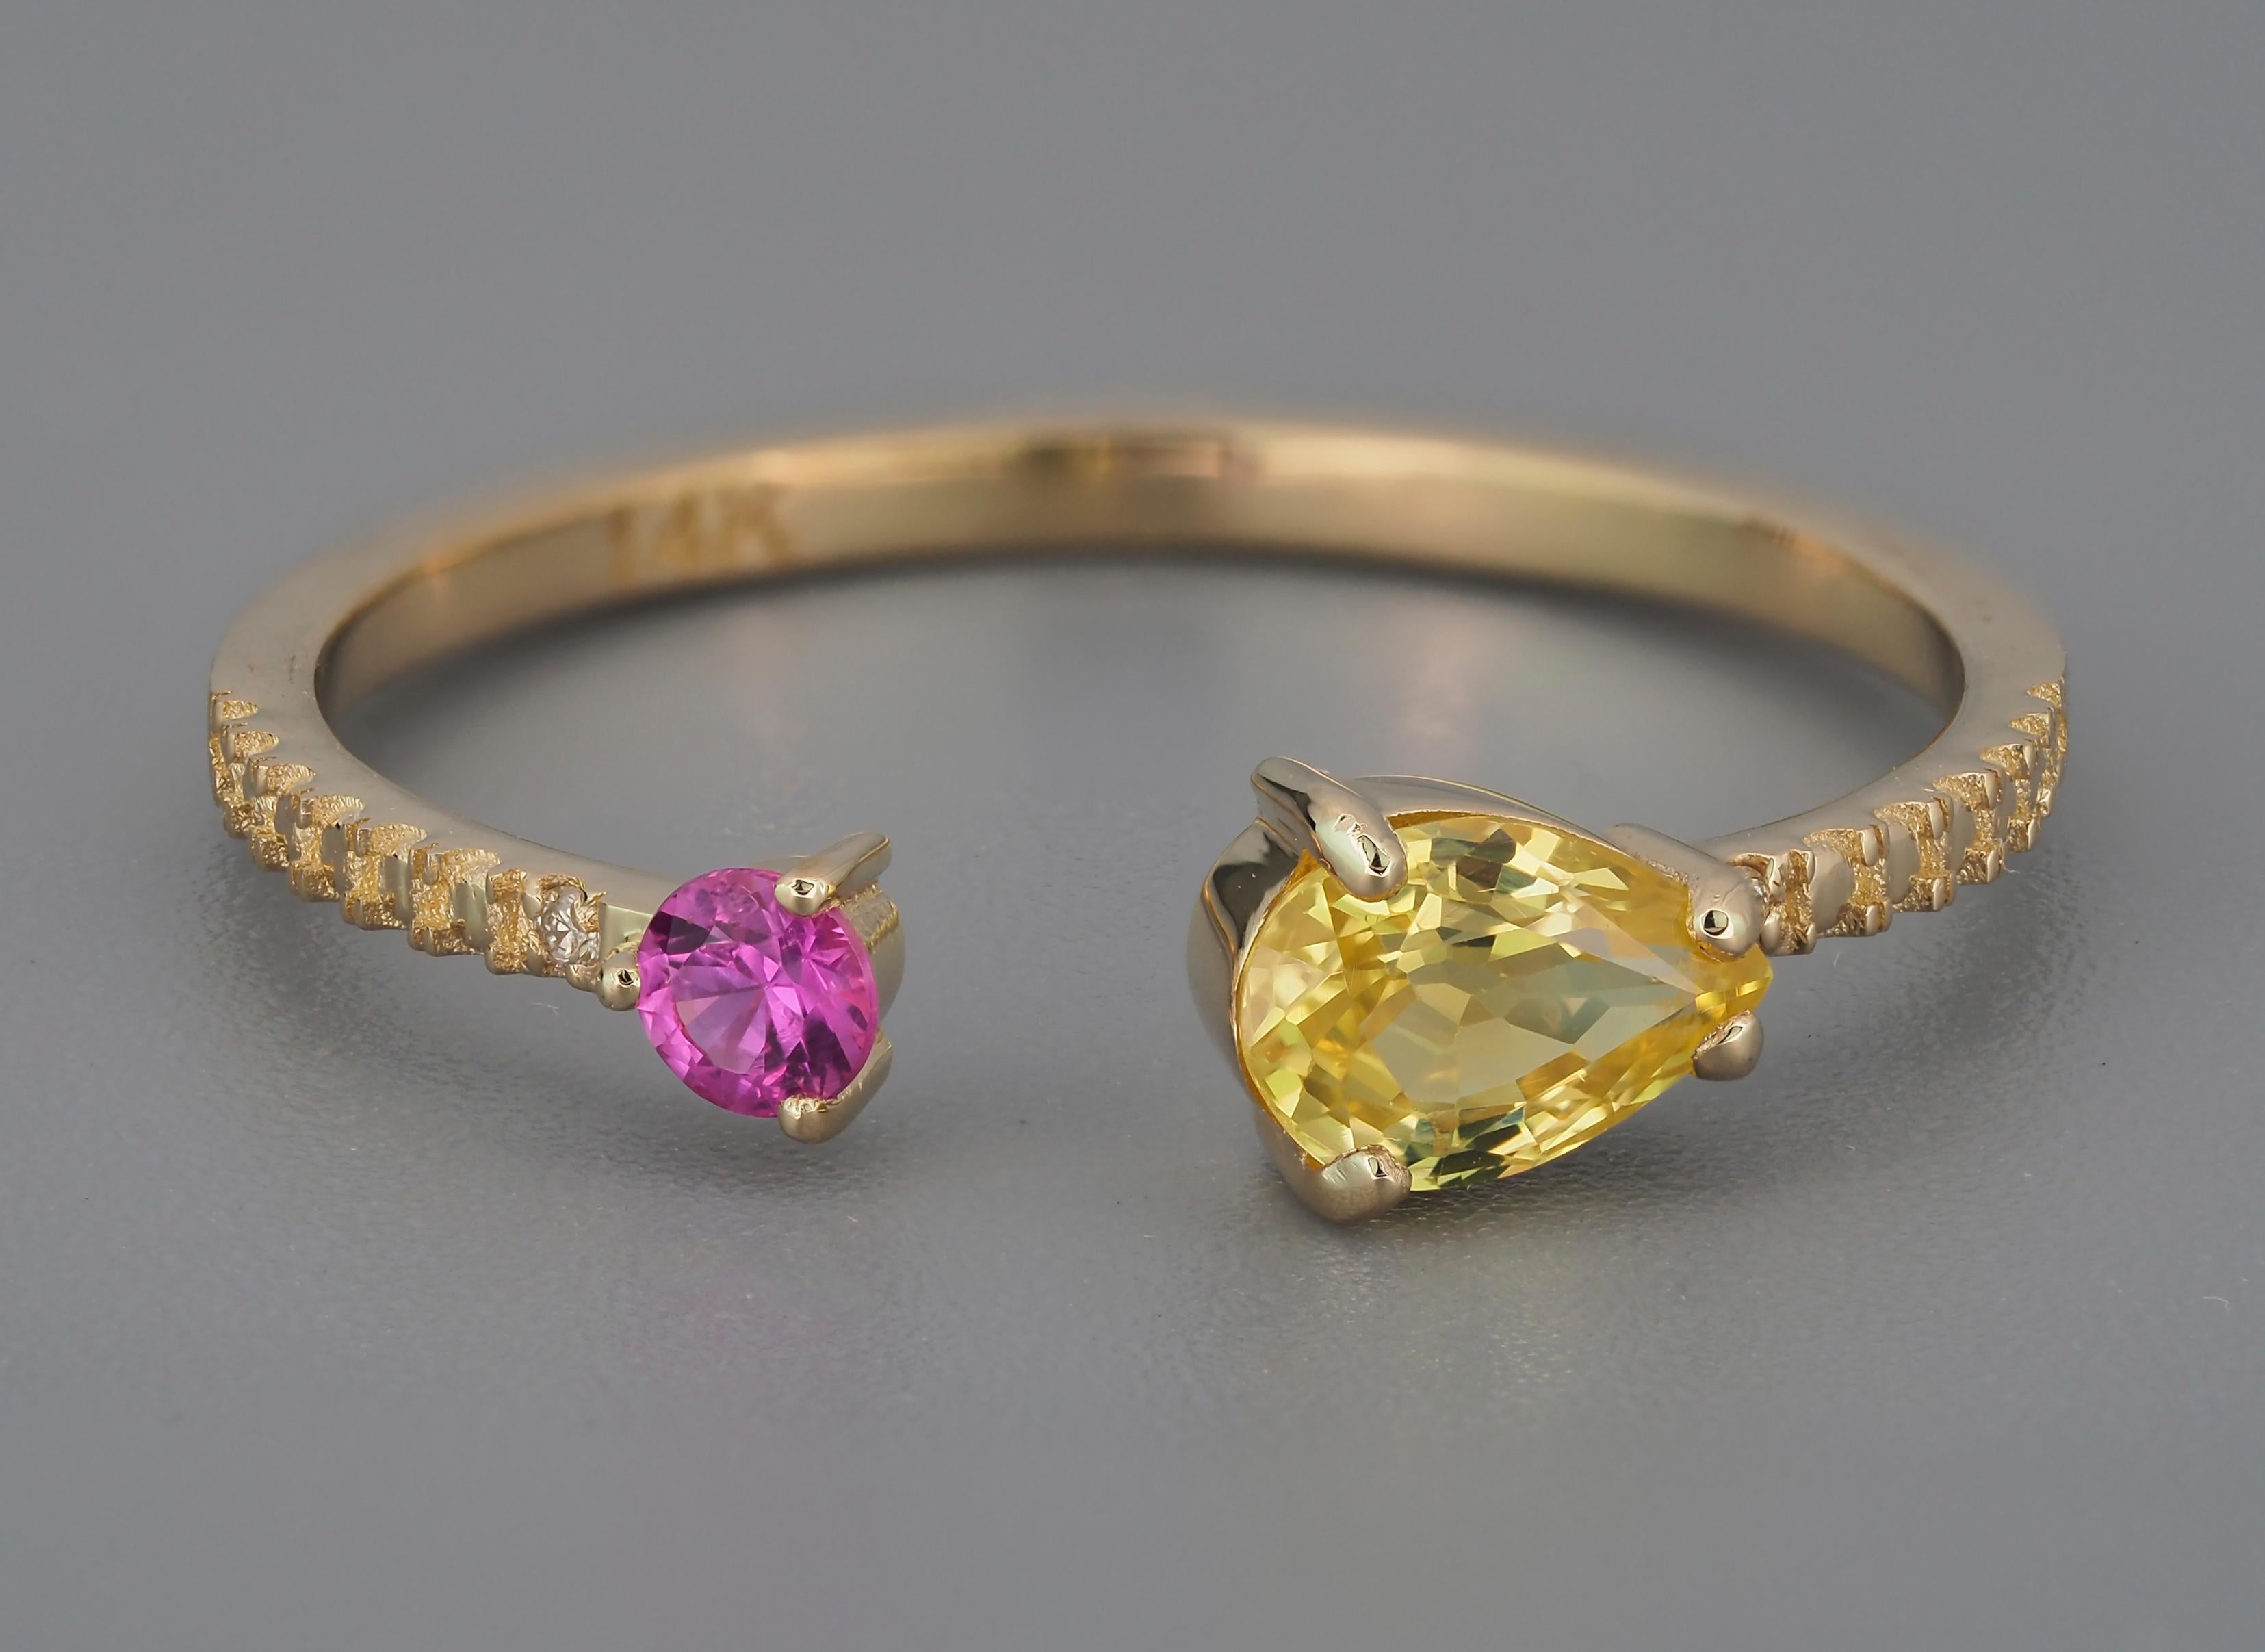 Yellow sapphire 14k gold ring. 
Pear sapphire gold ring. Genuine sapphire ring. Opened ended ring. Tiny sapphire ring. Delicate sapphire ring.

Weight: 1.3 g. depends from size.
Gold - 14k gold.

Central stone: Sapphire
Cut: pear
Weight: aprx 0.6